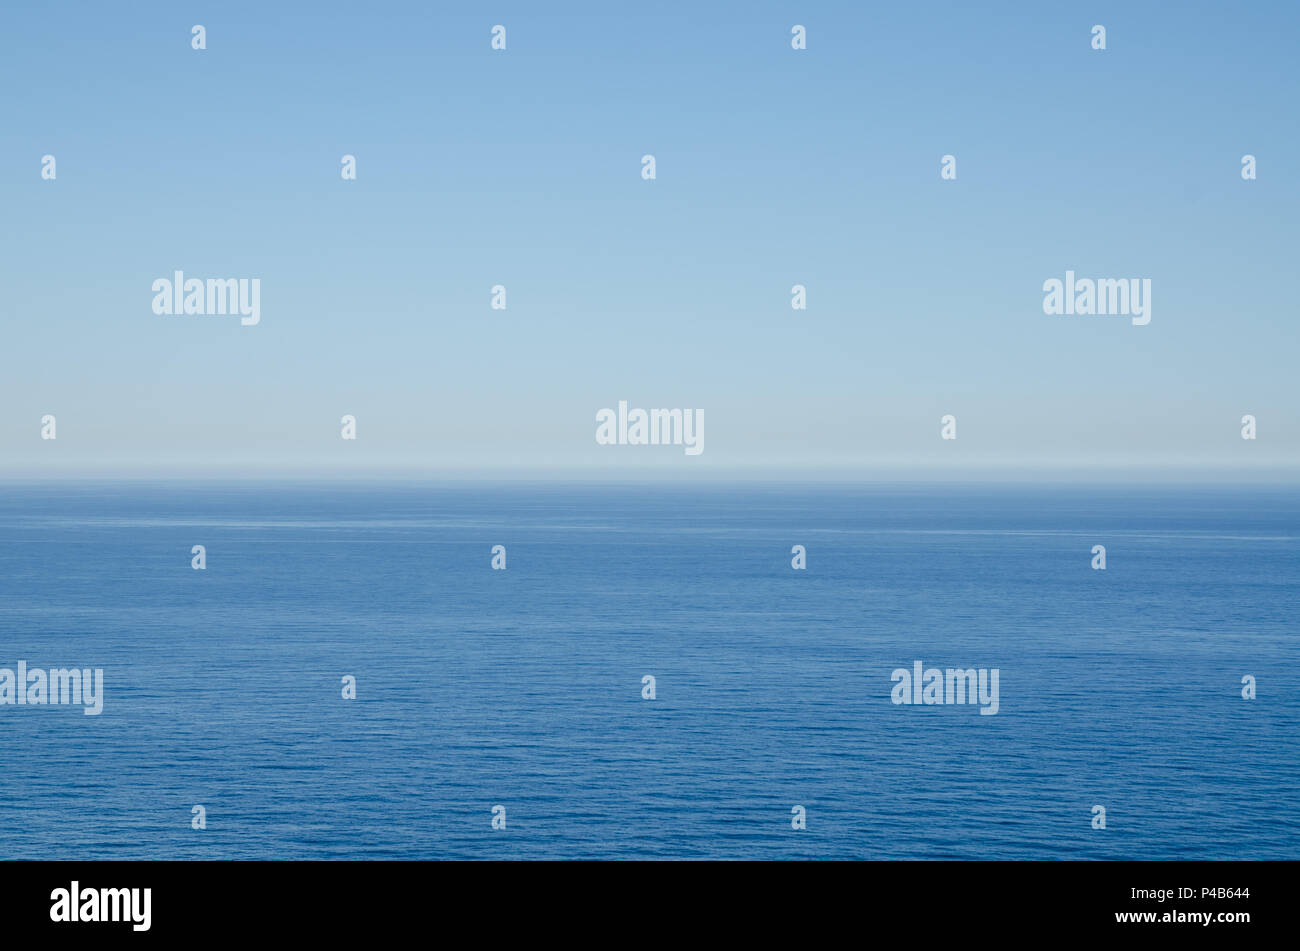 Simple background of blue Mediterranean sea against clear blue sky. Stock Photo